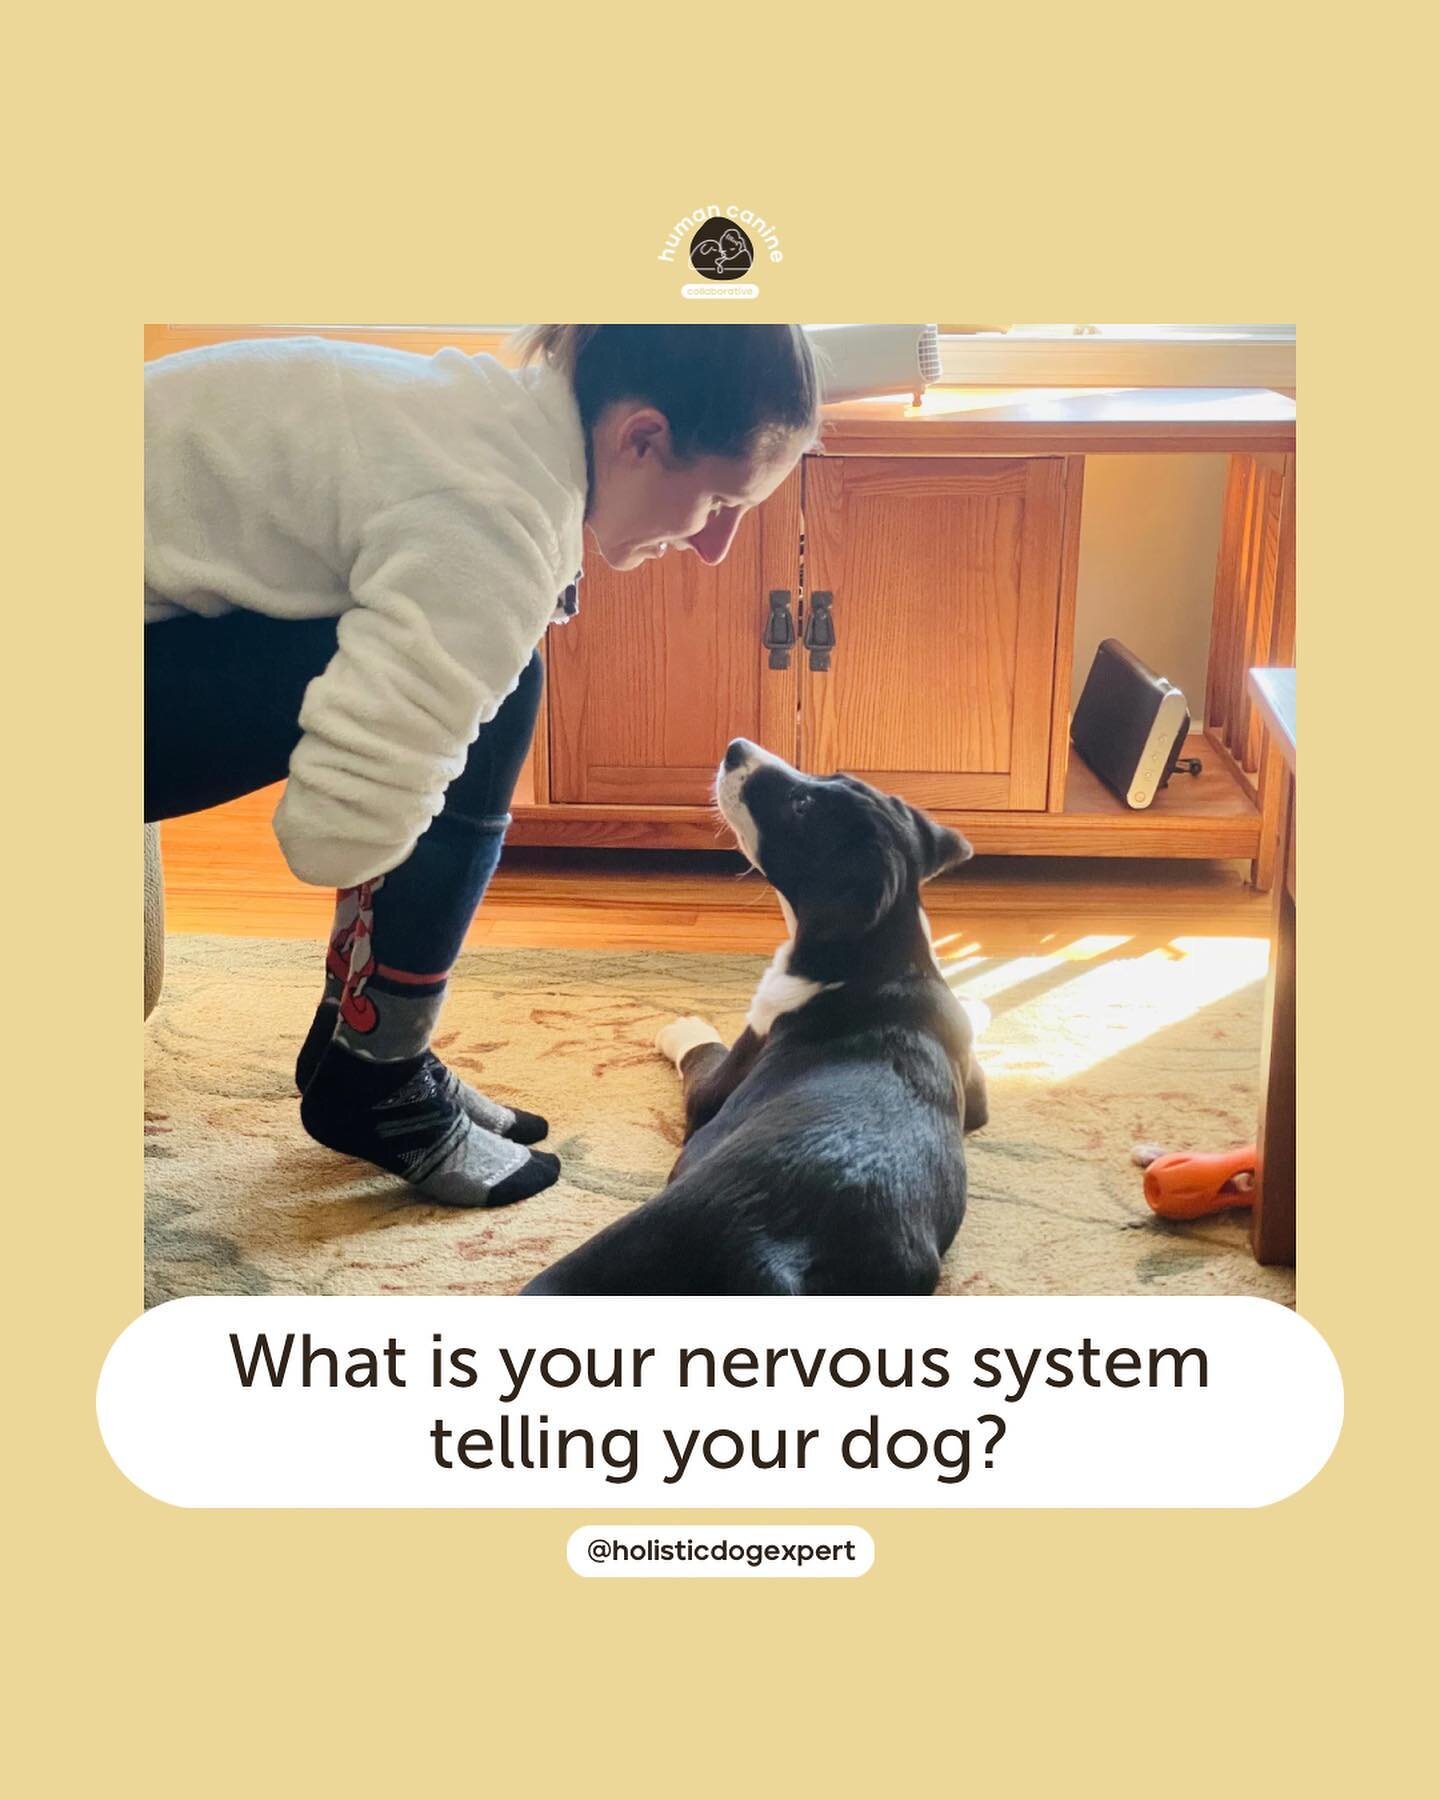 I used to feel like my nervous system was in charge and I was just along for the ride. I would see myself reacting to Muggins&rsquo;s behavior with frustration or anger. Afterward, I would feel overwhelmed with shame and guilt. I knew all the dog tra